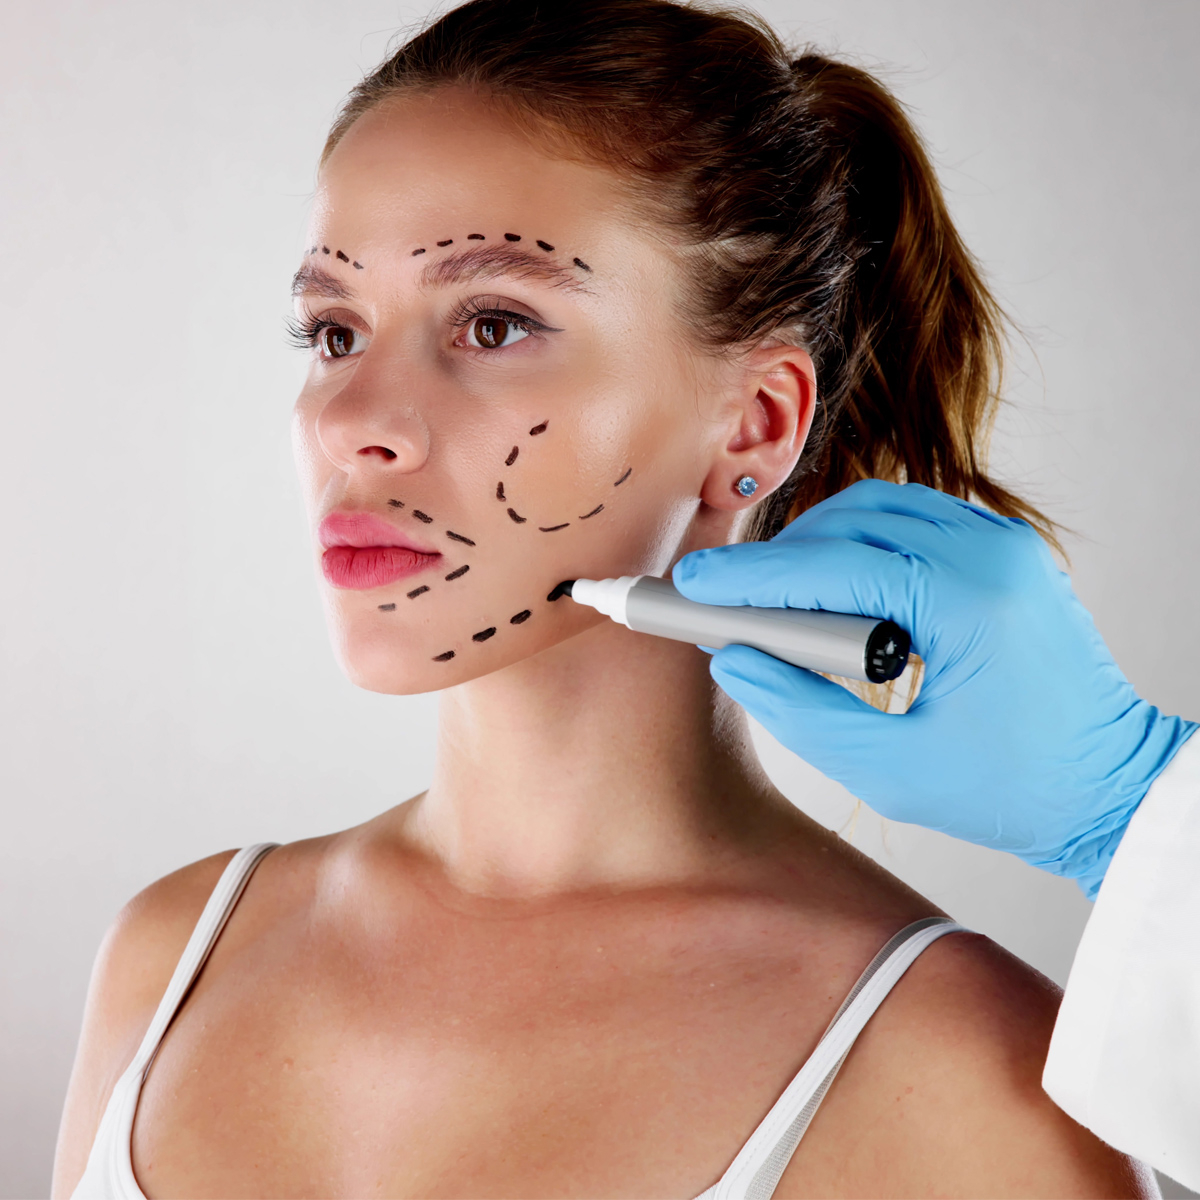 Inside the Dark, Sometimes Deadly World of Cosmetic Surgery